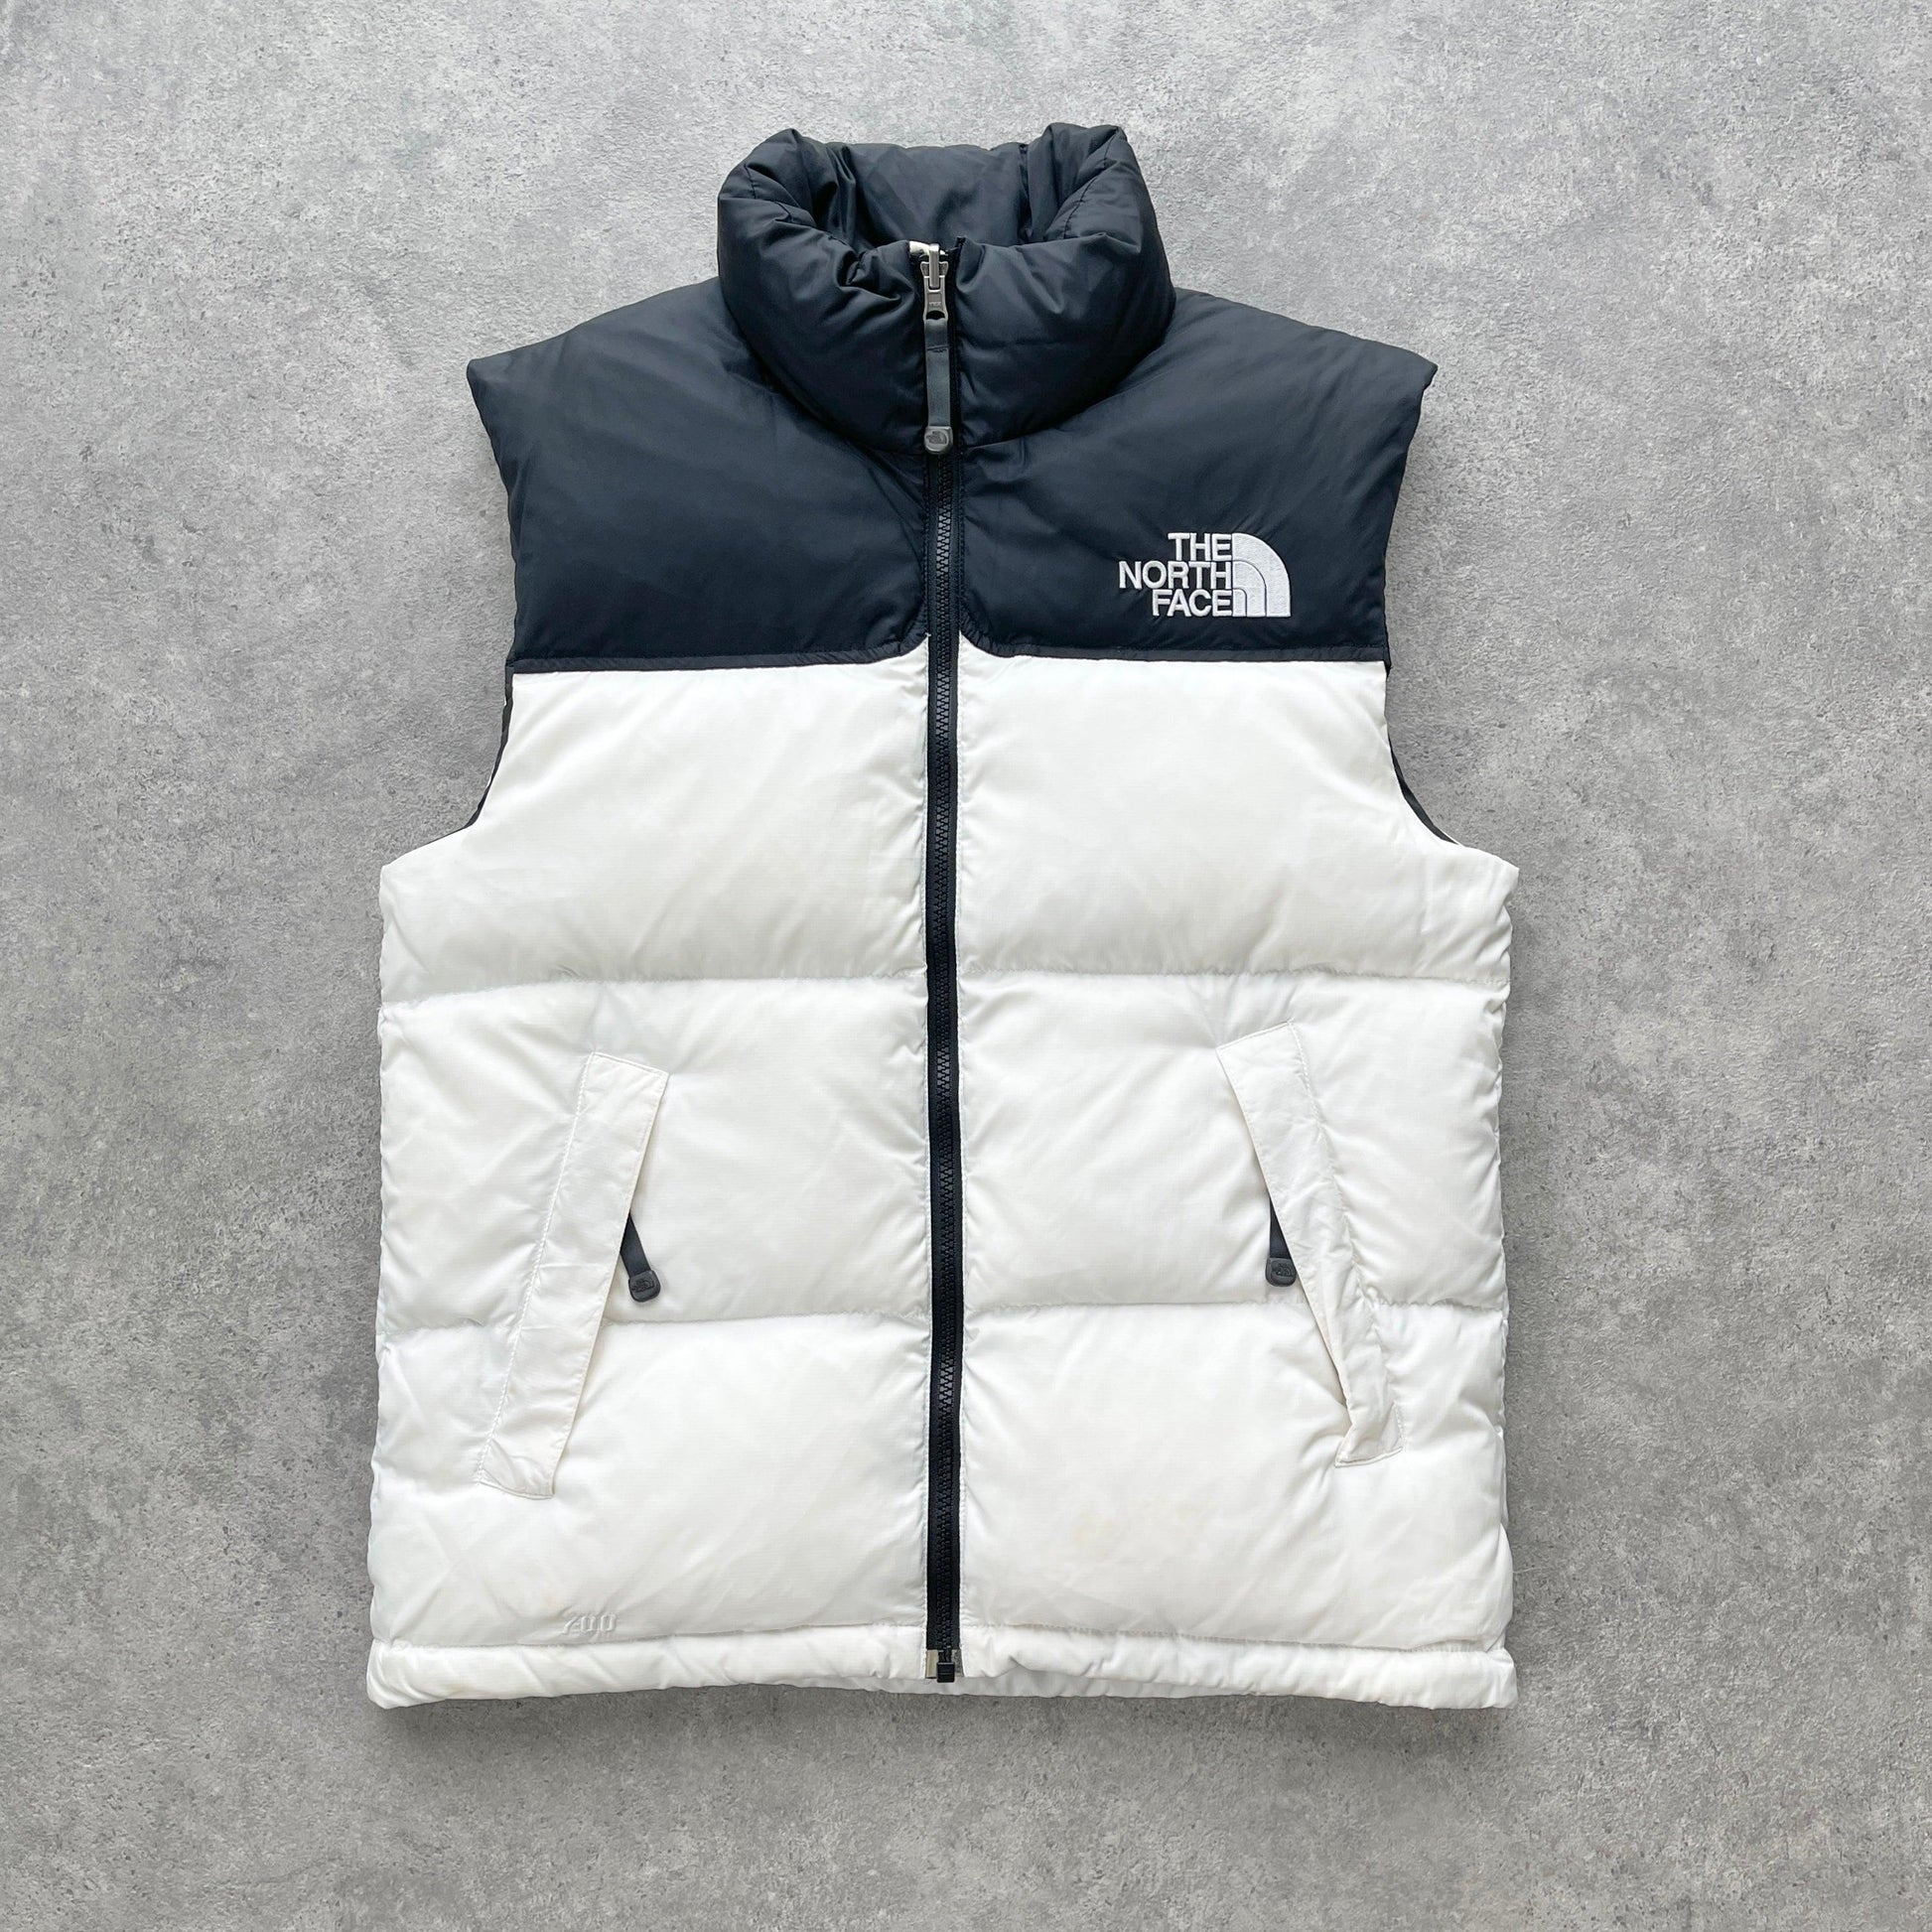 The North Face Nuptse 700 down fill puffer gilet (XS) - Known Source